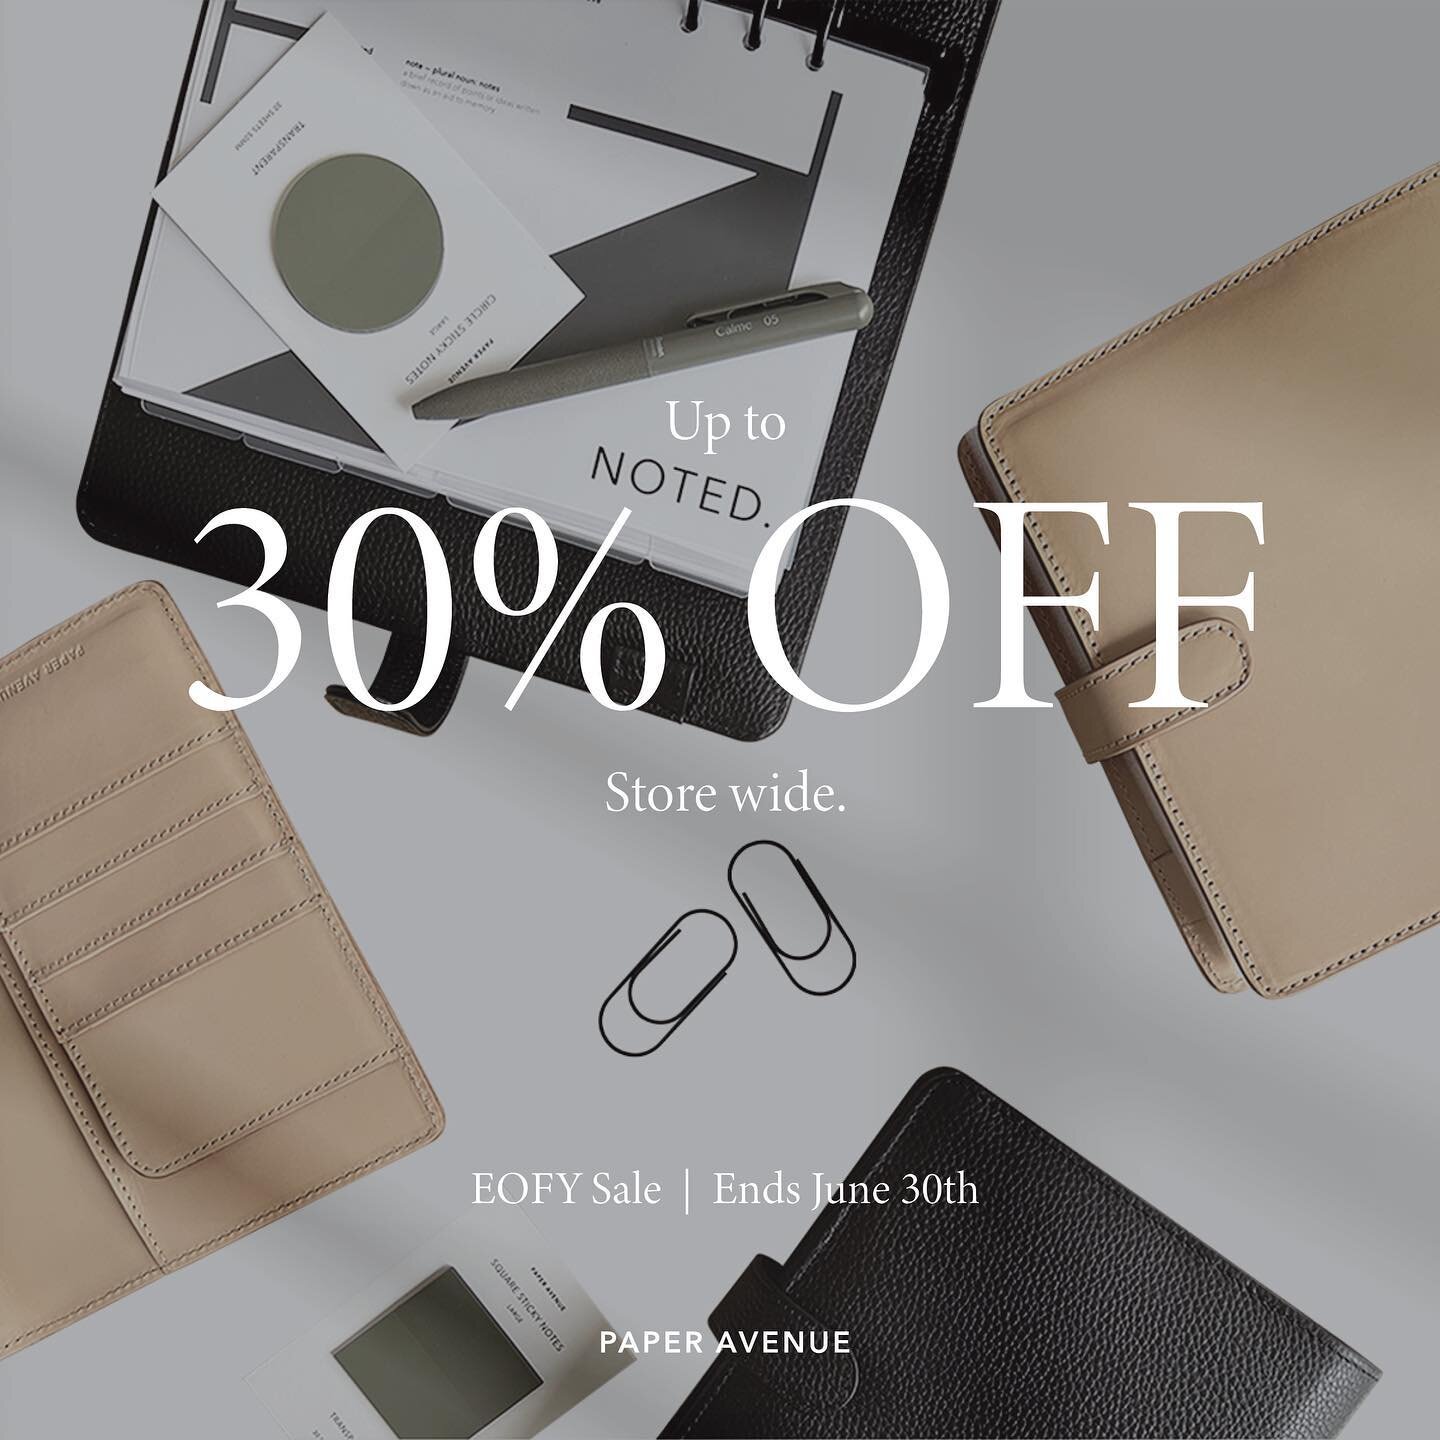 EOFY Sale starts now! Enjoy up to 30% off store wide.

FREE gift with every purchase + FREE shipping on all Australian orders over $75 - shop now.

#plannershop #plannercommunity #planneraddict #plannerlove #stationary #stationarystore #stationarysho